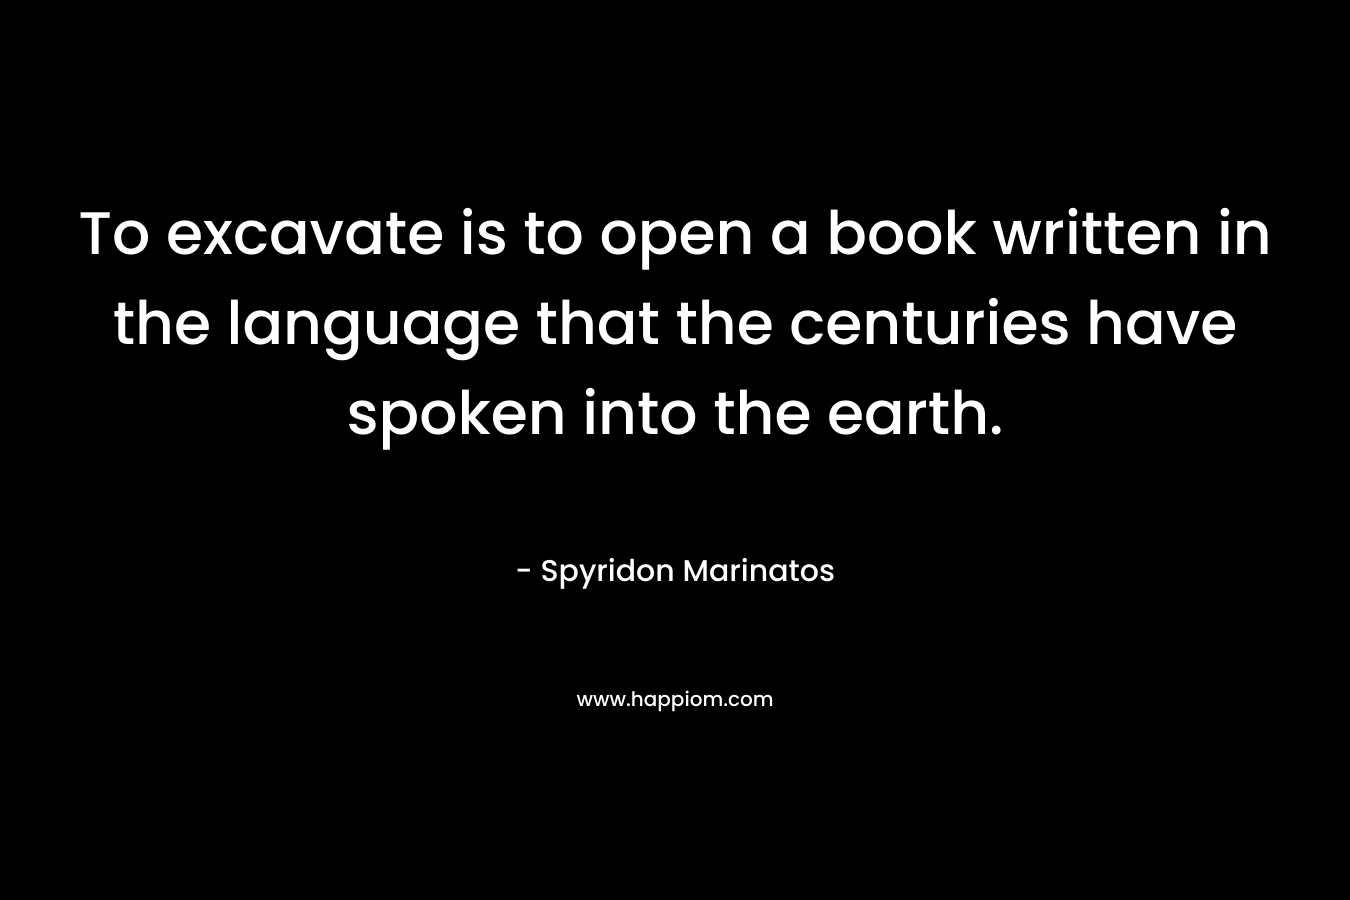 To excavate is to open a book written in the language that the centuries have spoken into the earth.